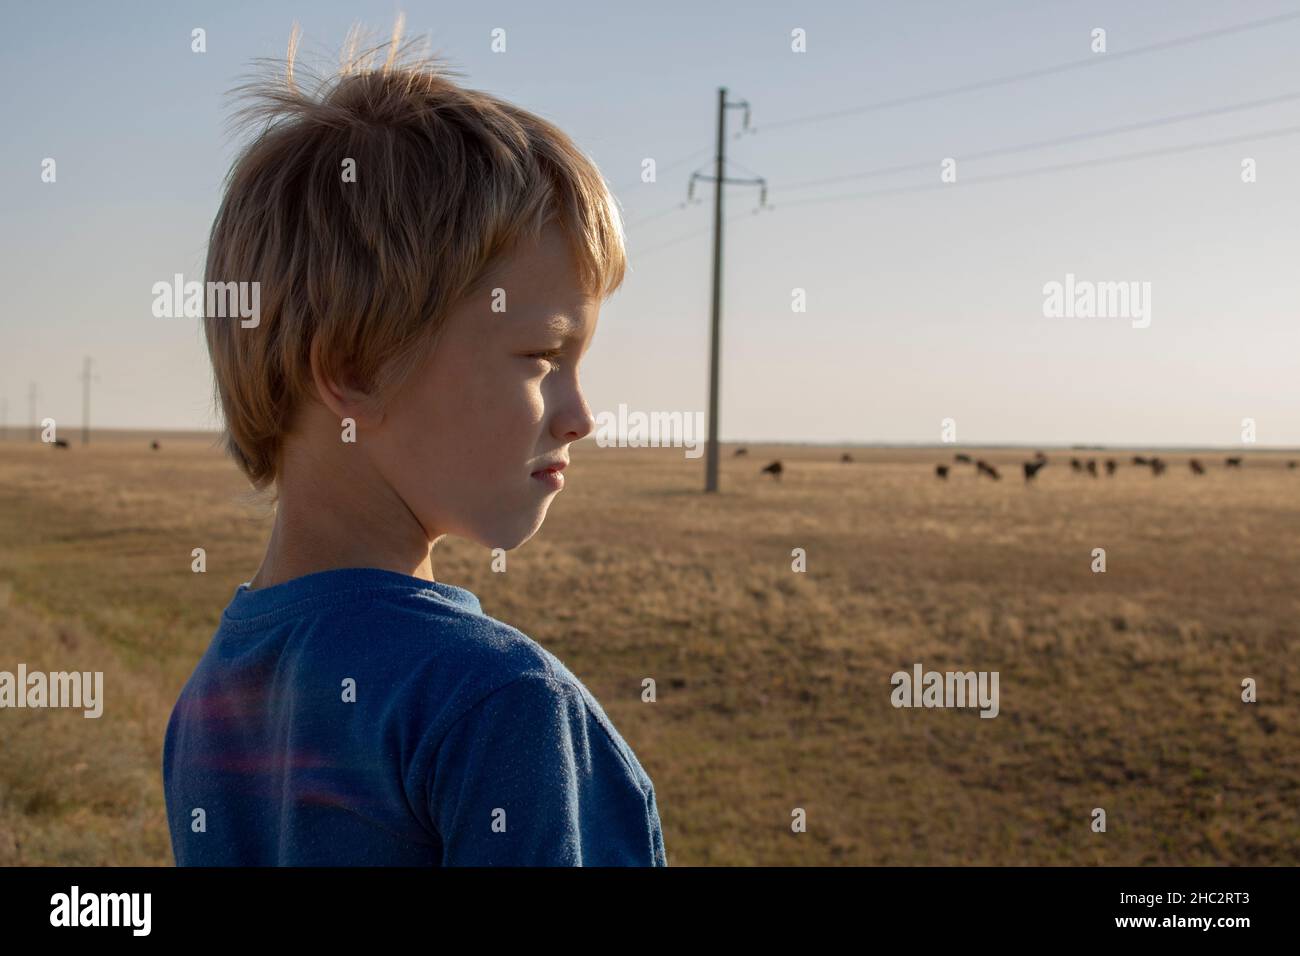 A child looking at steppe with cows, young traveller Stock Photo